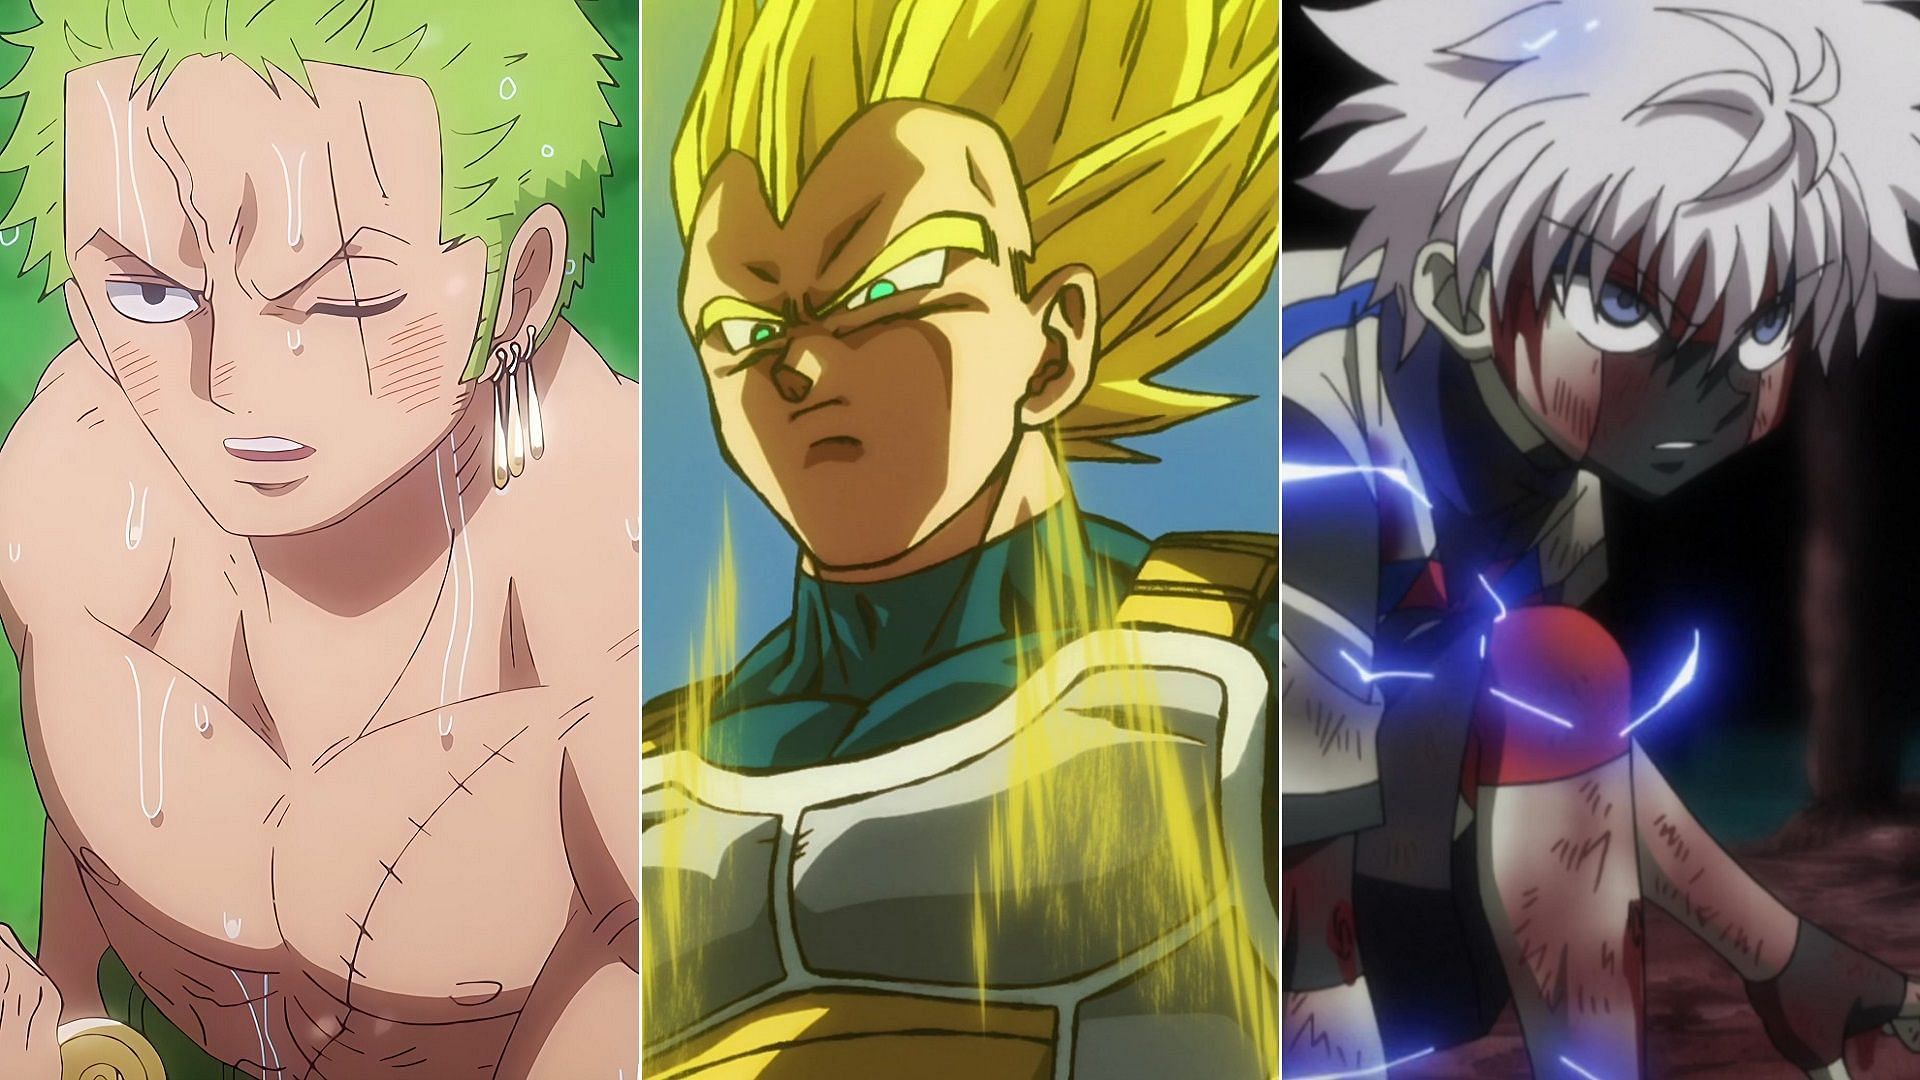 Zoro from One Piece,Vegeta from Dragon Ball, and Killua from Hunter &times; Hunter (Image via Toei Animation/Madhouse)